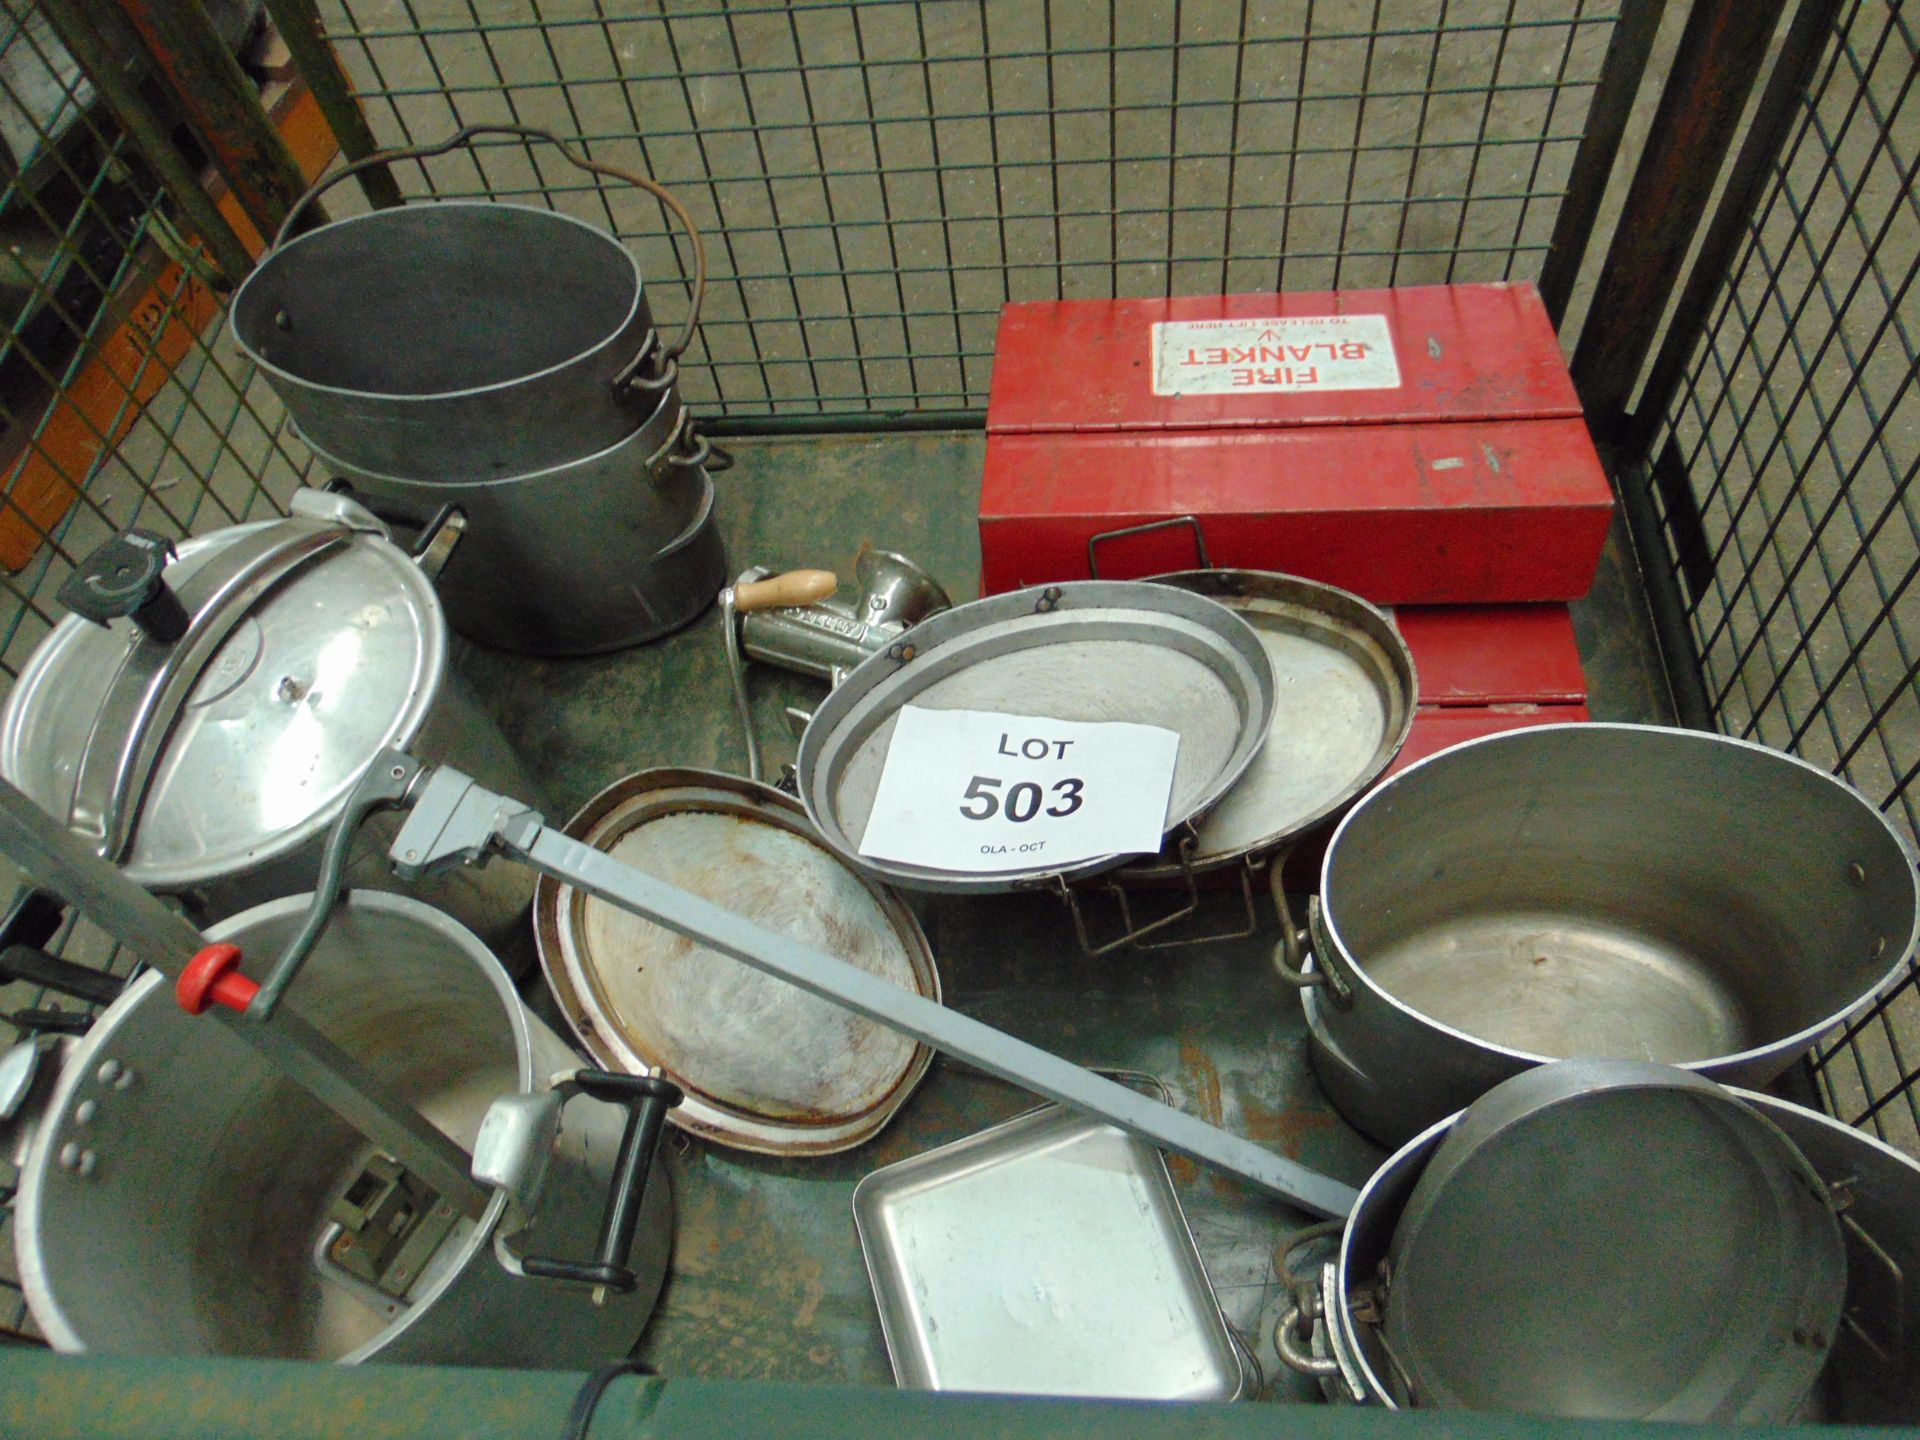 1x Stillage of Cooking Equipment in Pressure Cooker, tin openers, dixies etc - Image 3 of 3